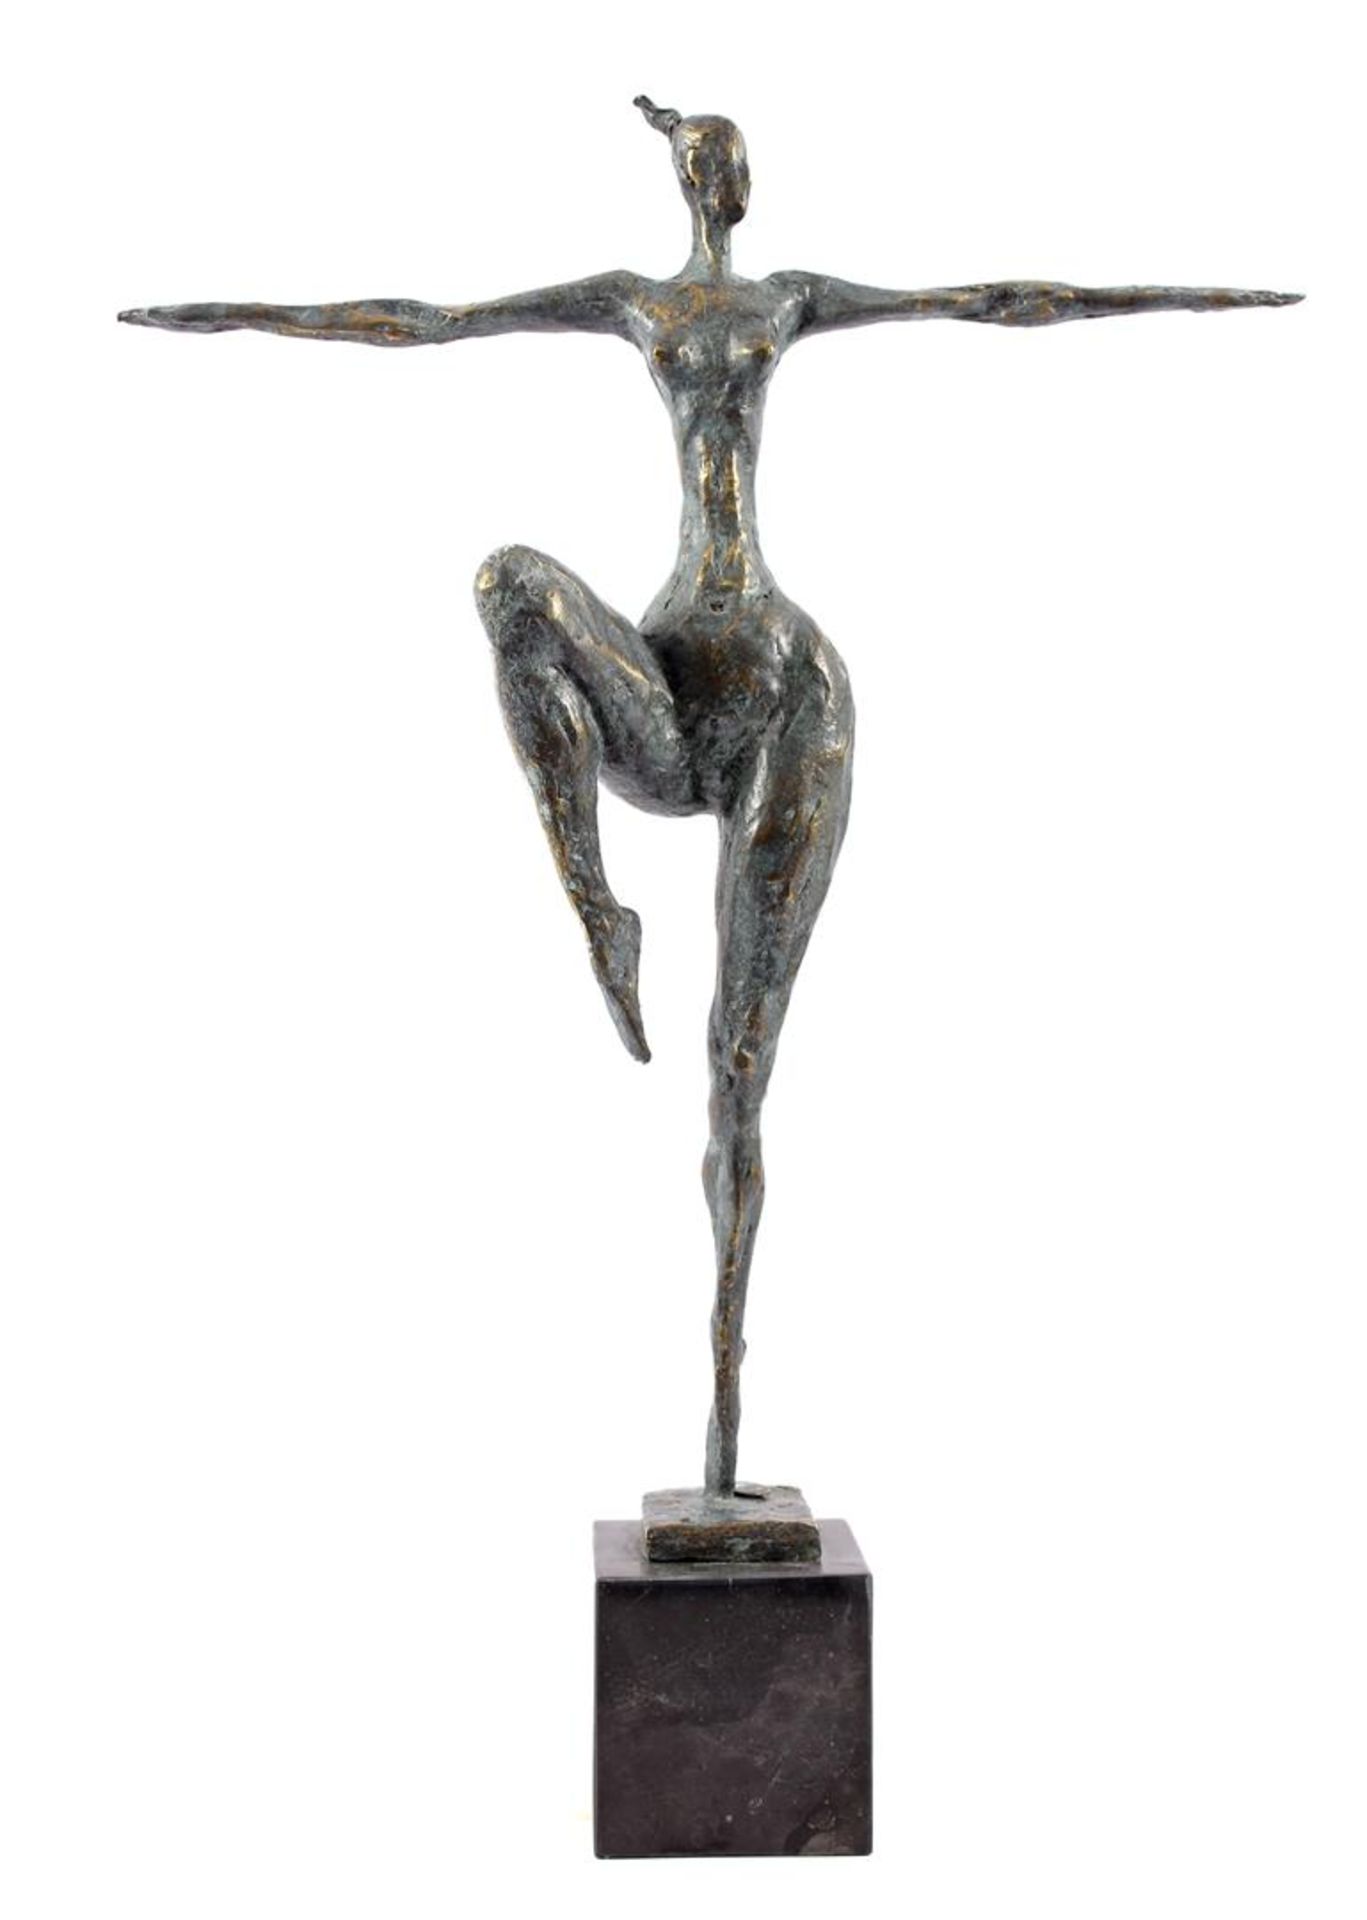 Unclearly signed, bronze sculpture of a woman, 52 cm high